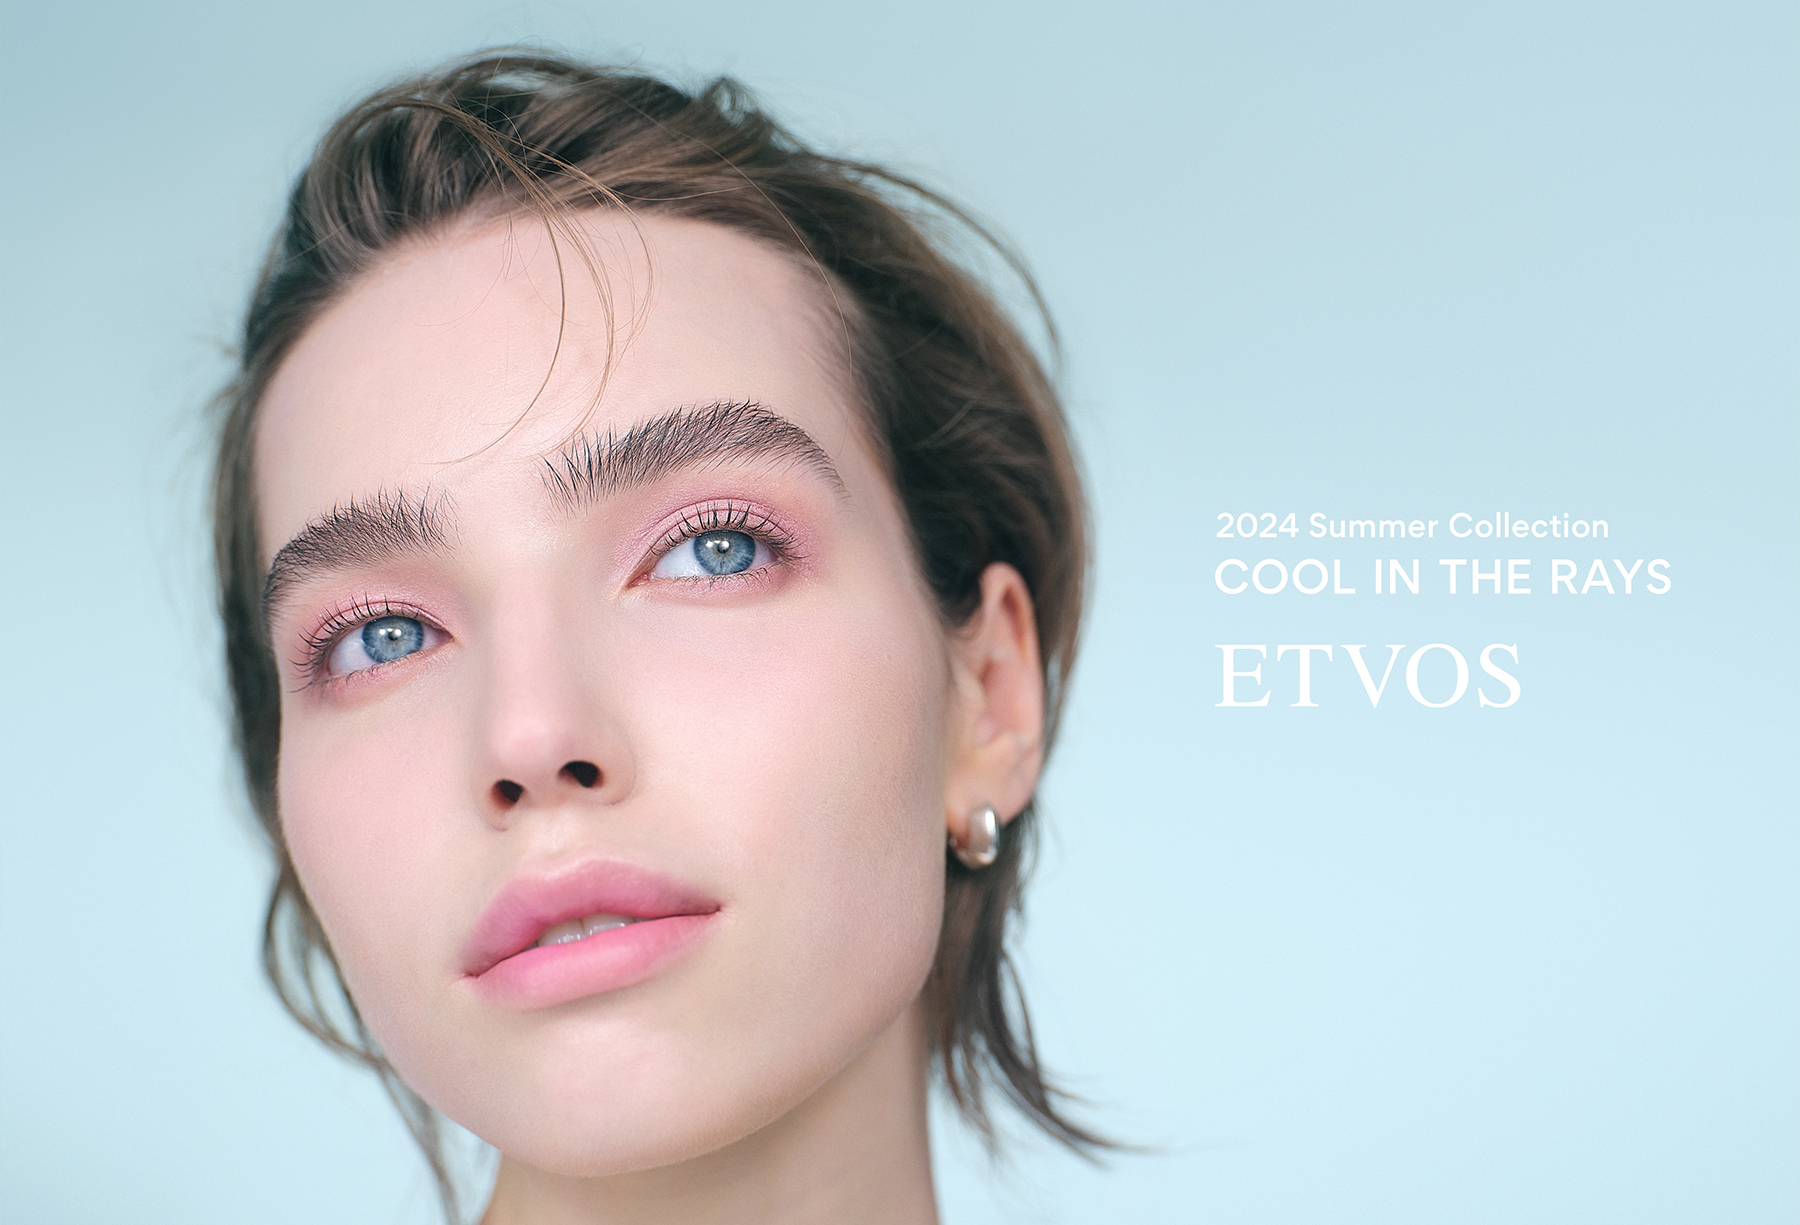 ETVOS 2024 Summer Collection COOL IN THE RAYS メインビジュアル